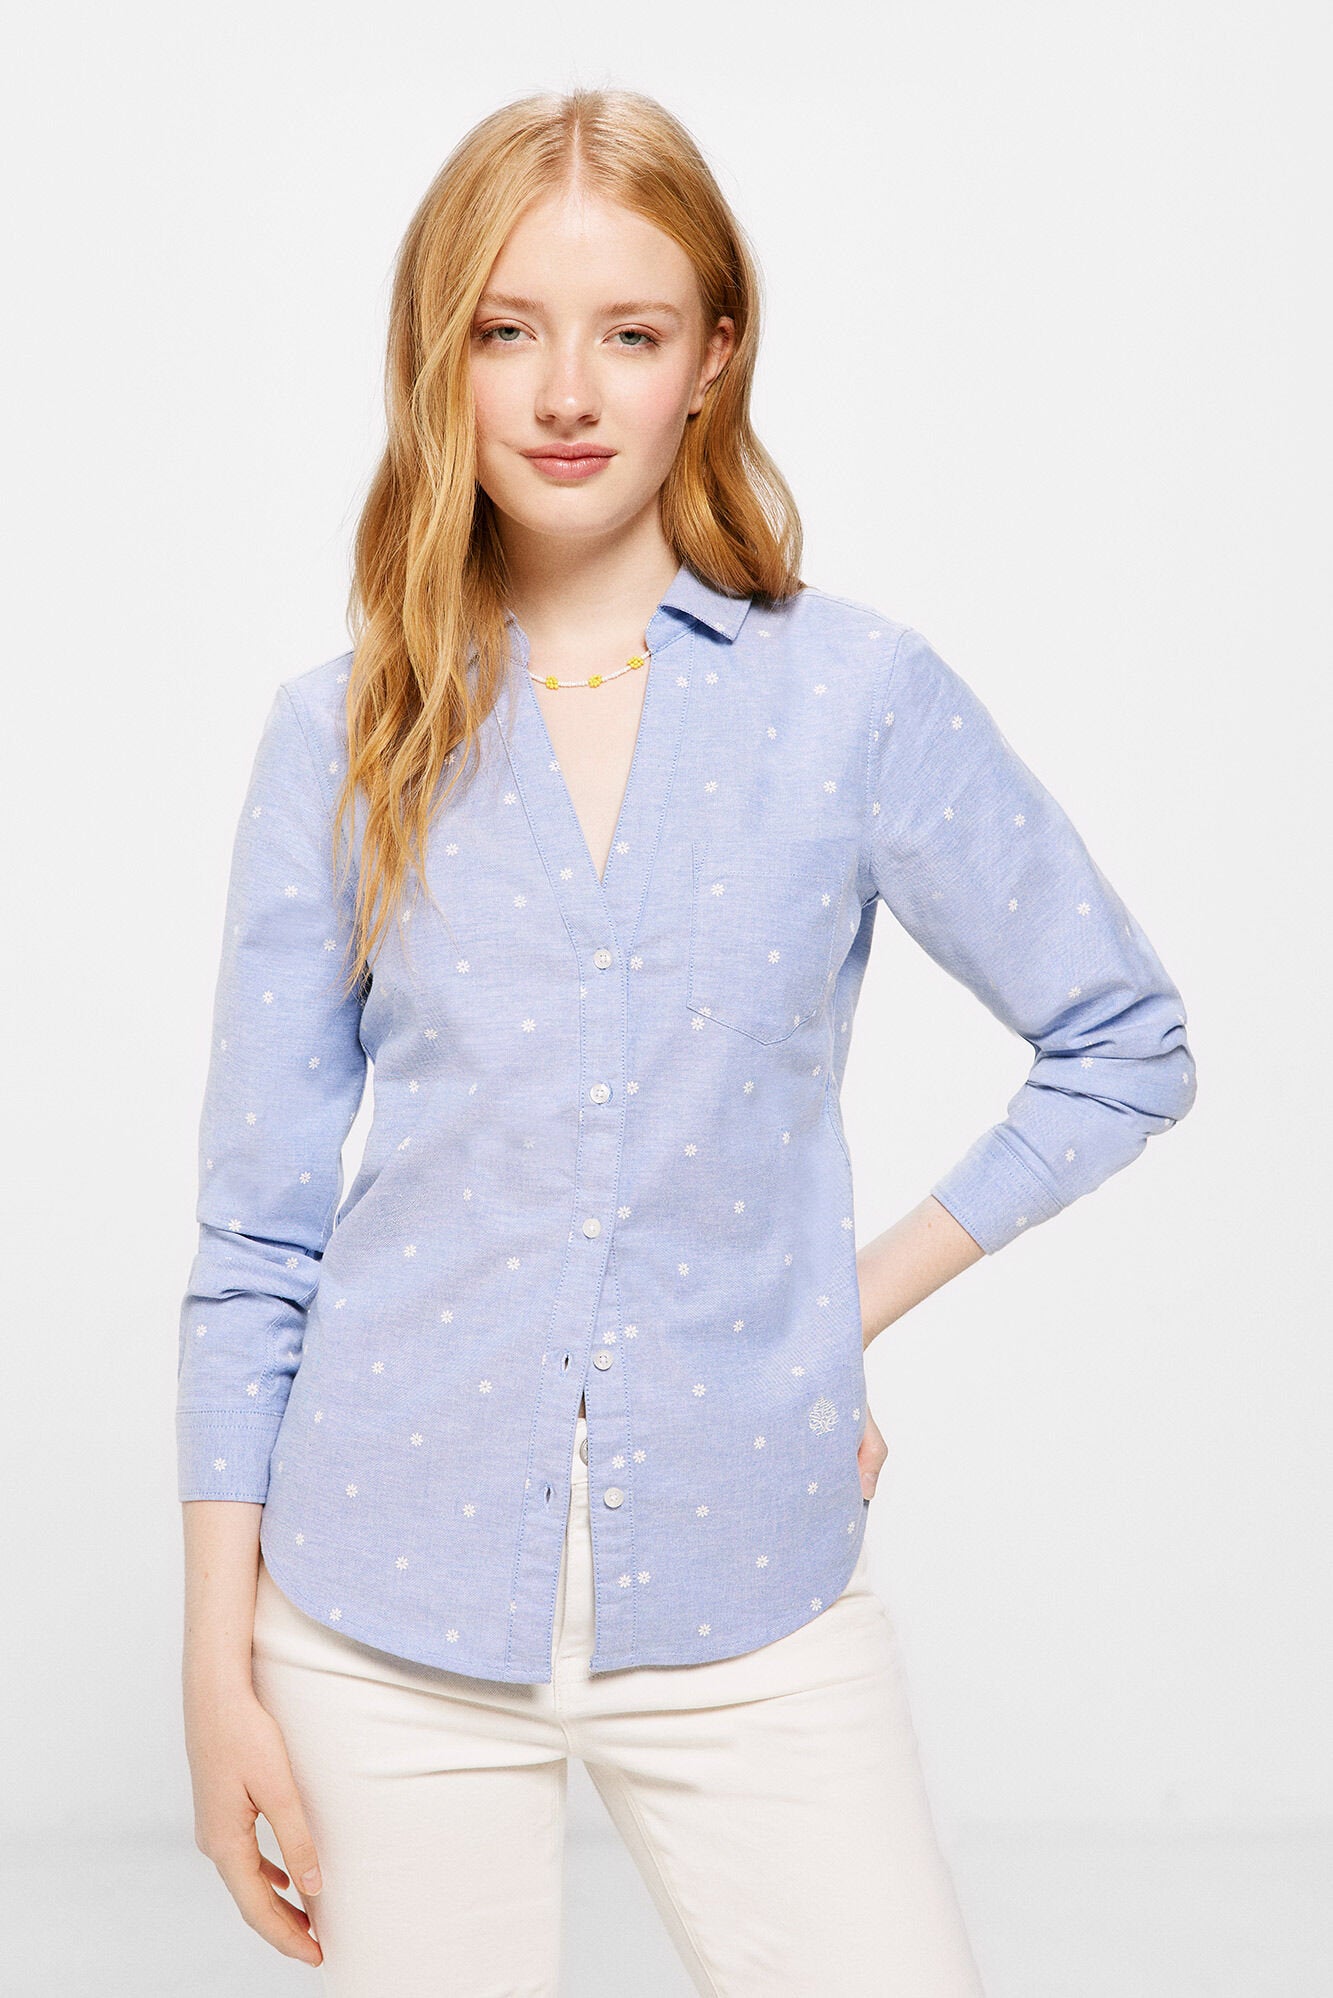 Button Down Shirt With V Neck_6797706_16_07